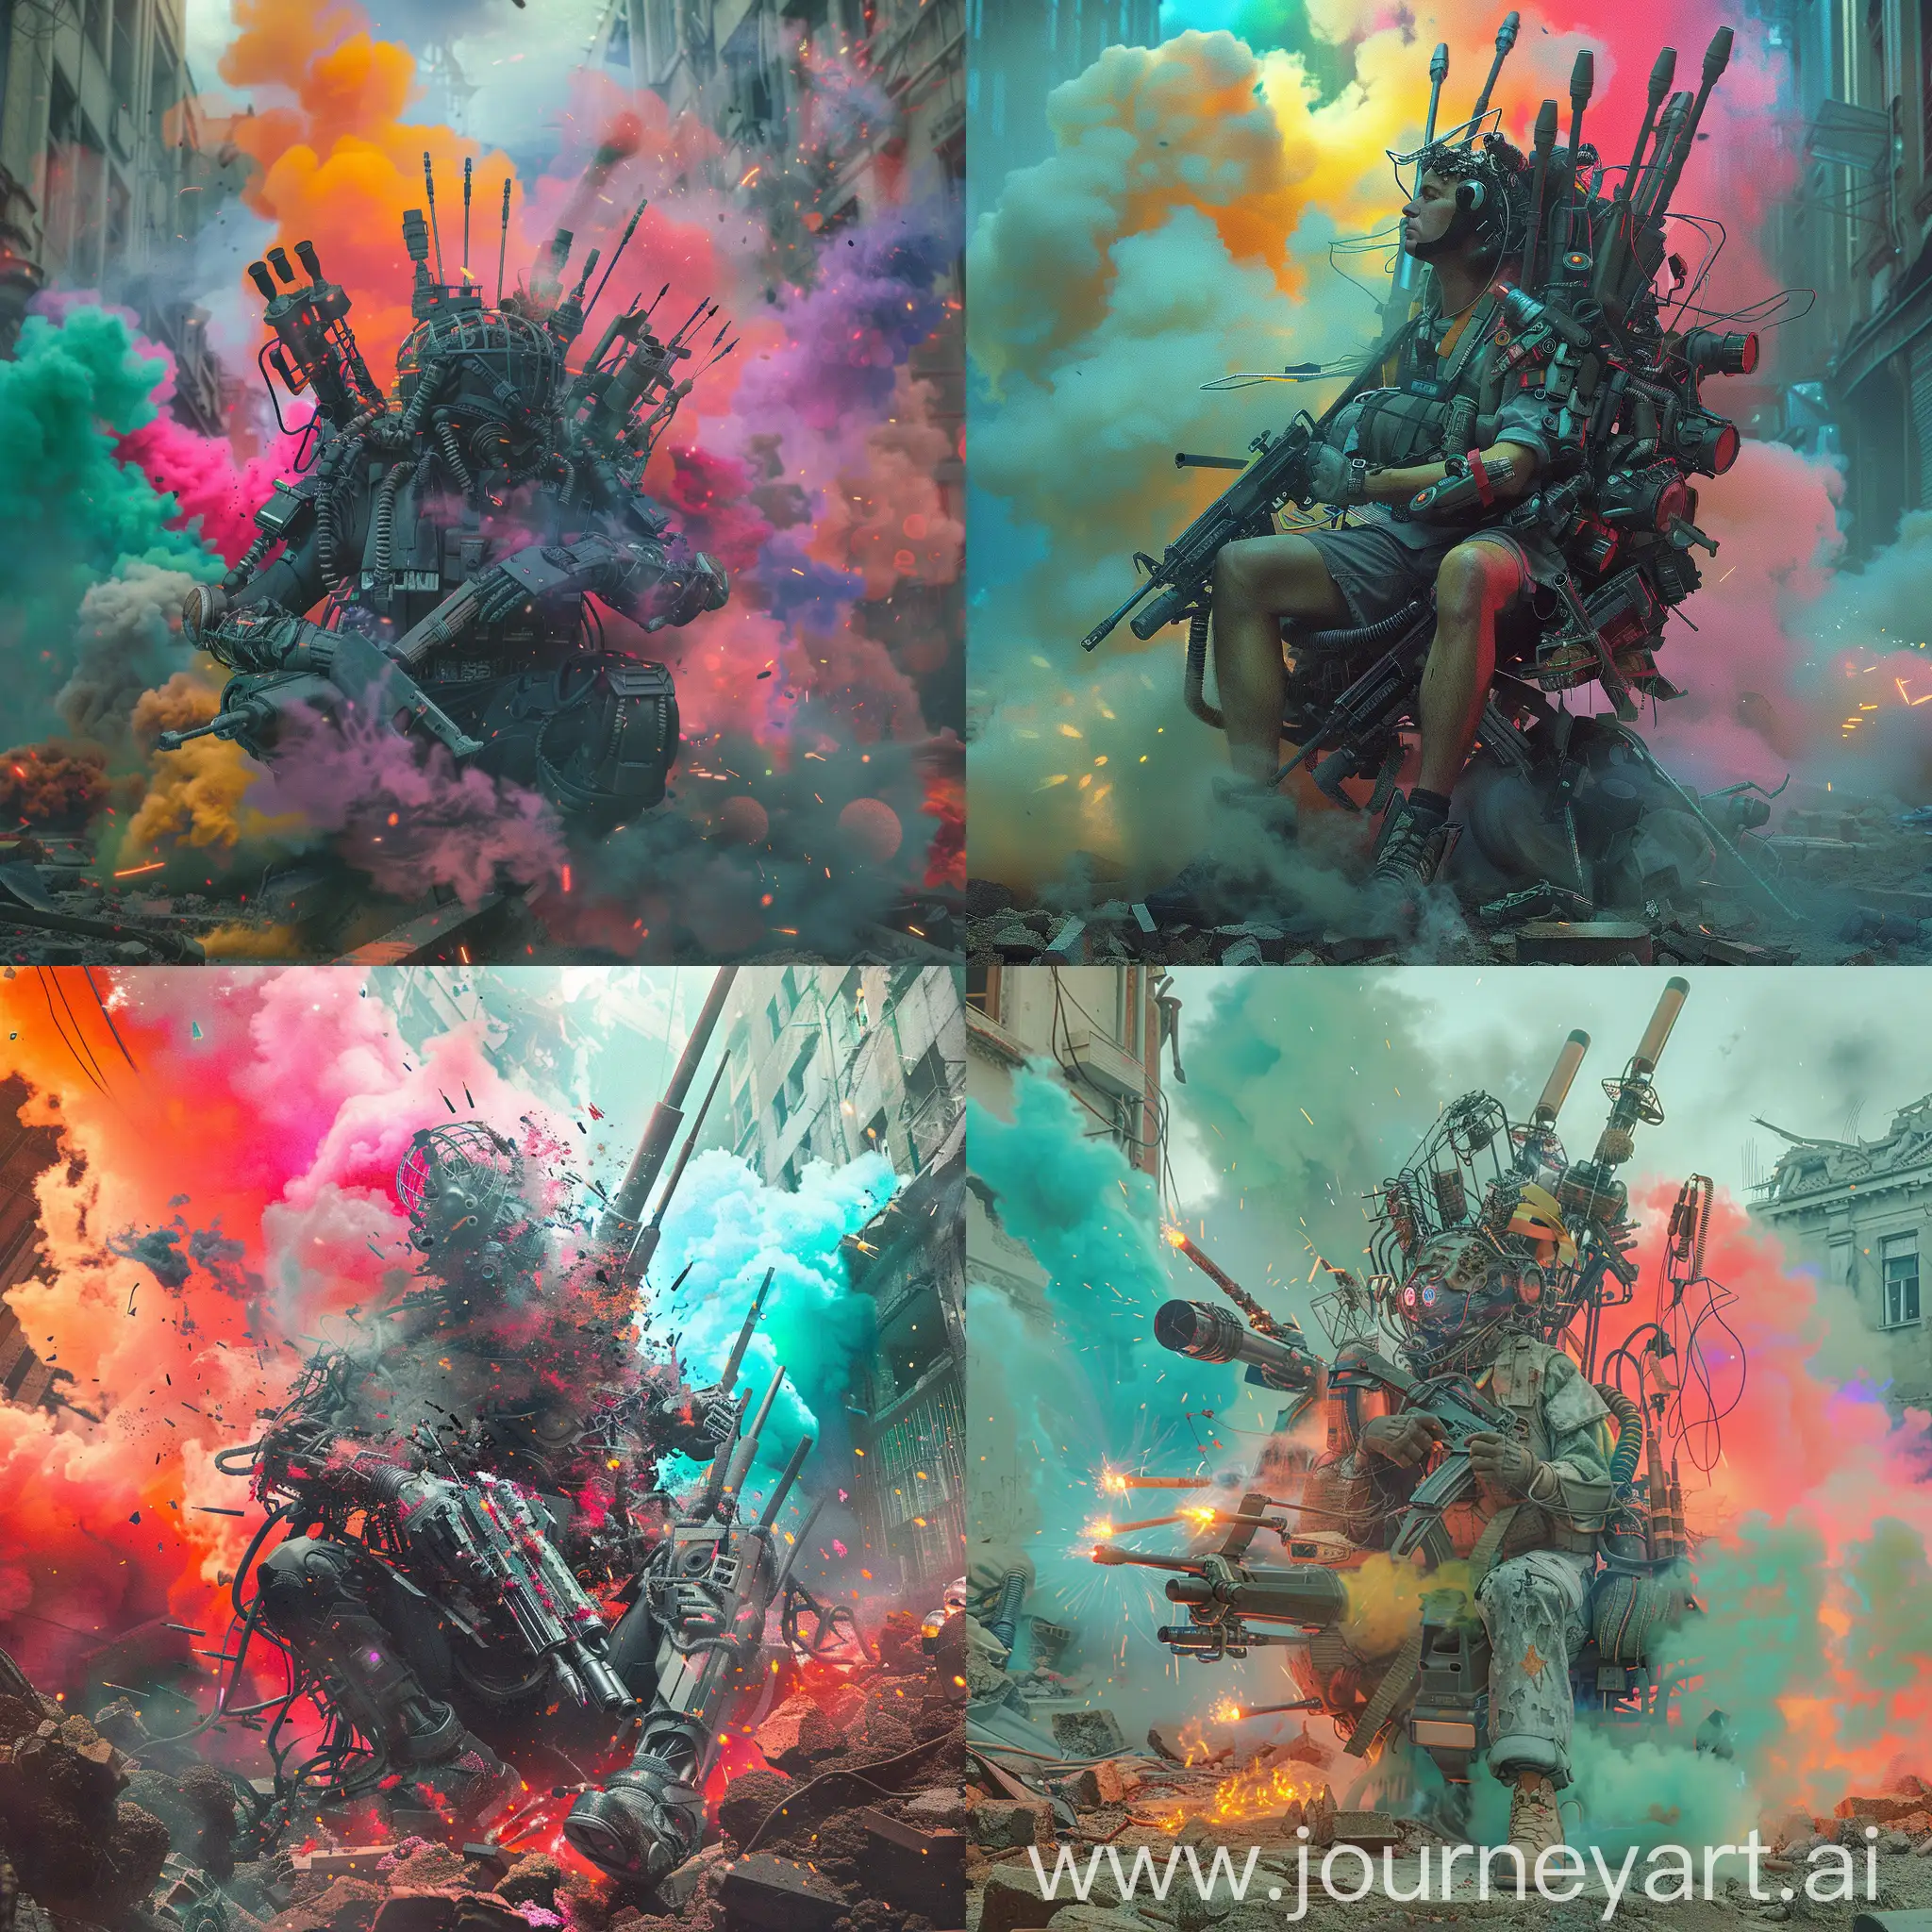 Futuristic-Warrior-in-Detailed-Robot-Suit-Amidst-Urban-Destruction-with-Vibrant-Smoke